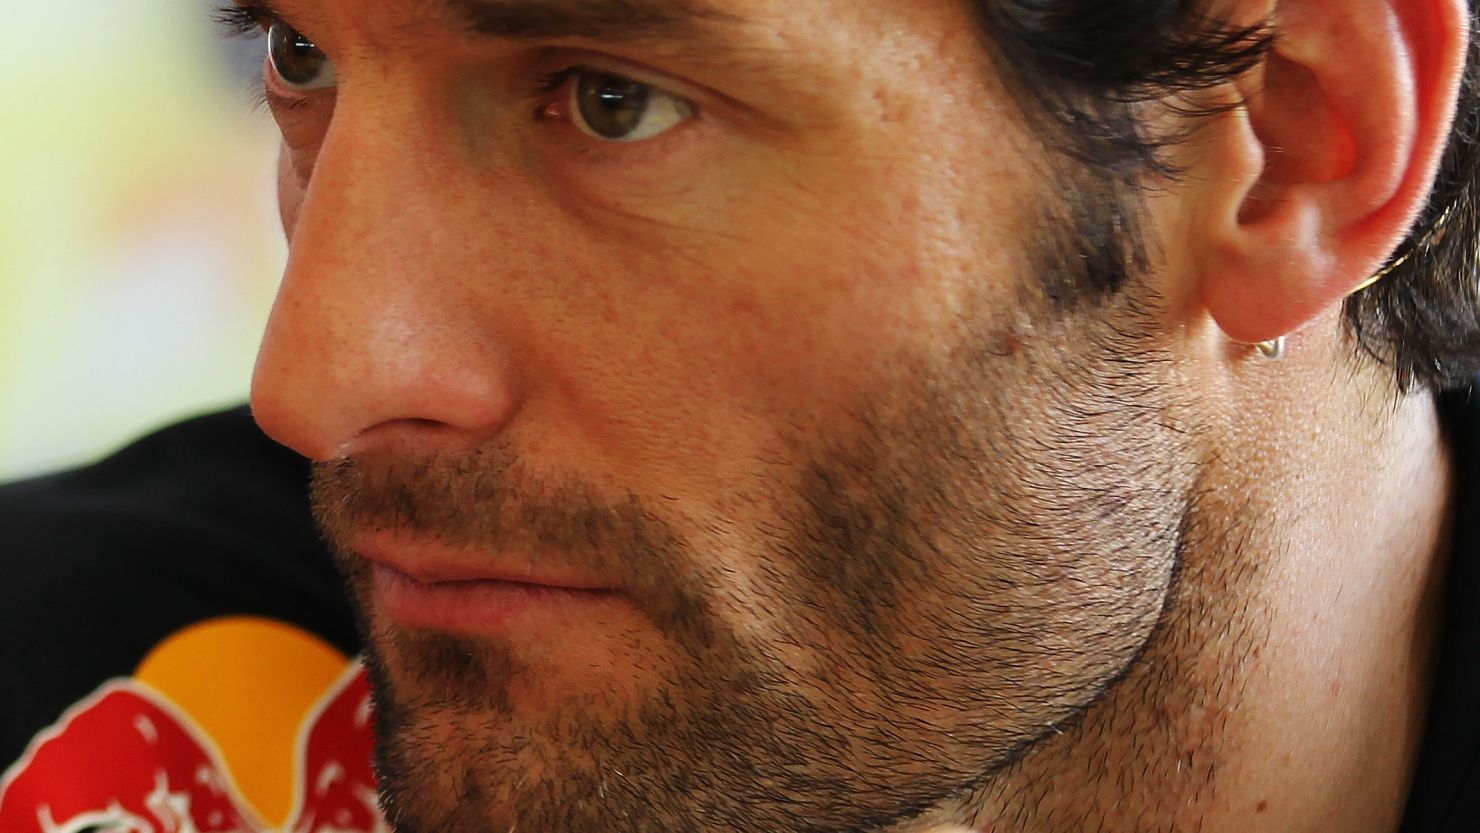 Mark Webber is currently second in the drivers' standings, 13 points behind Ferrari's Fernando Alonso